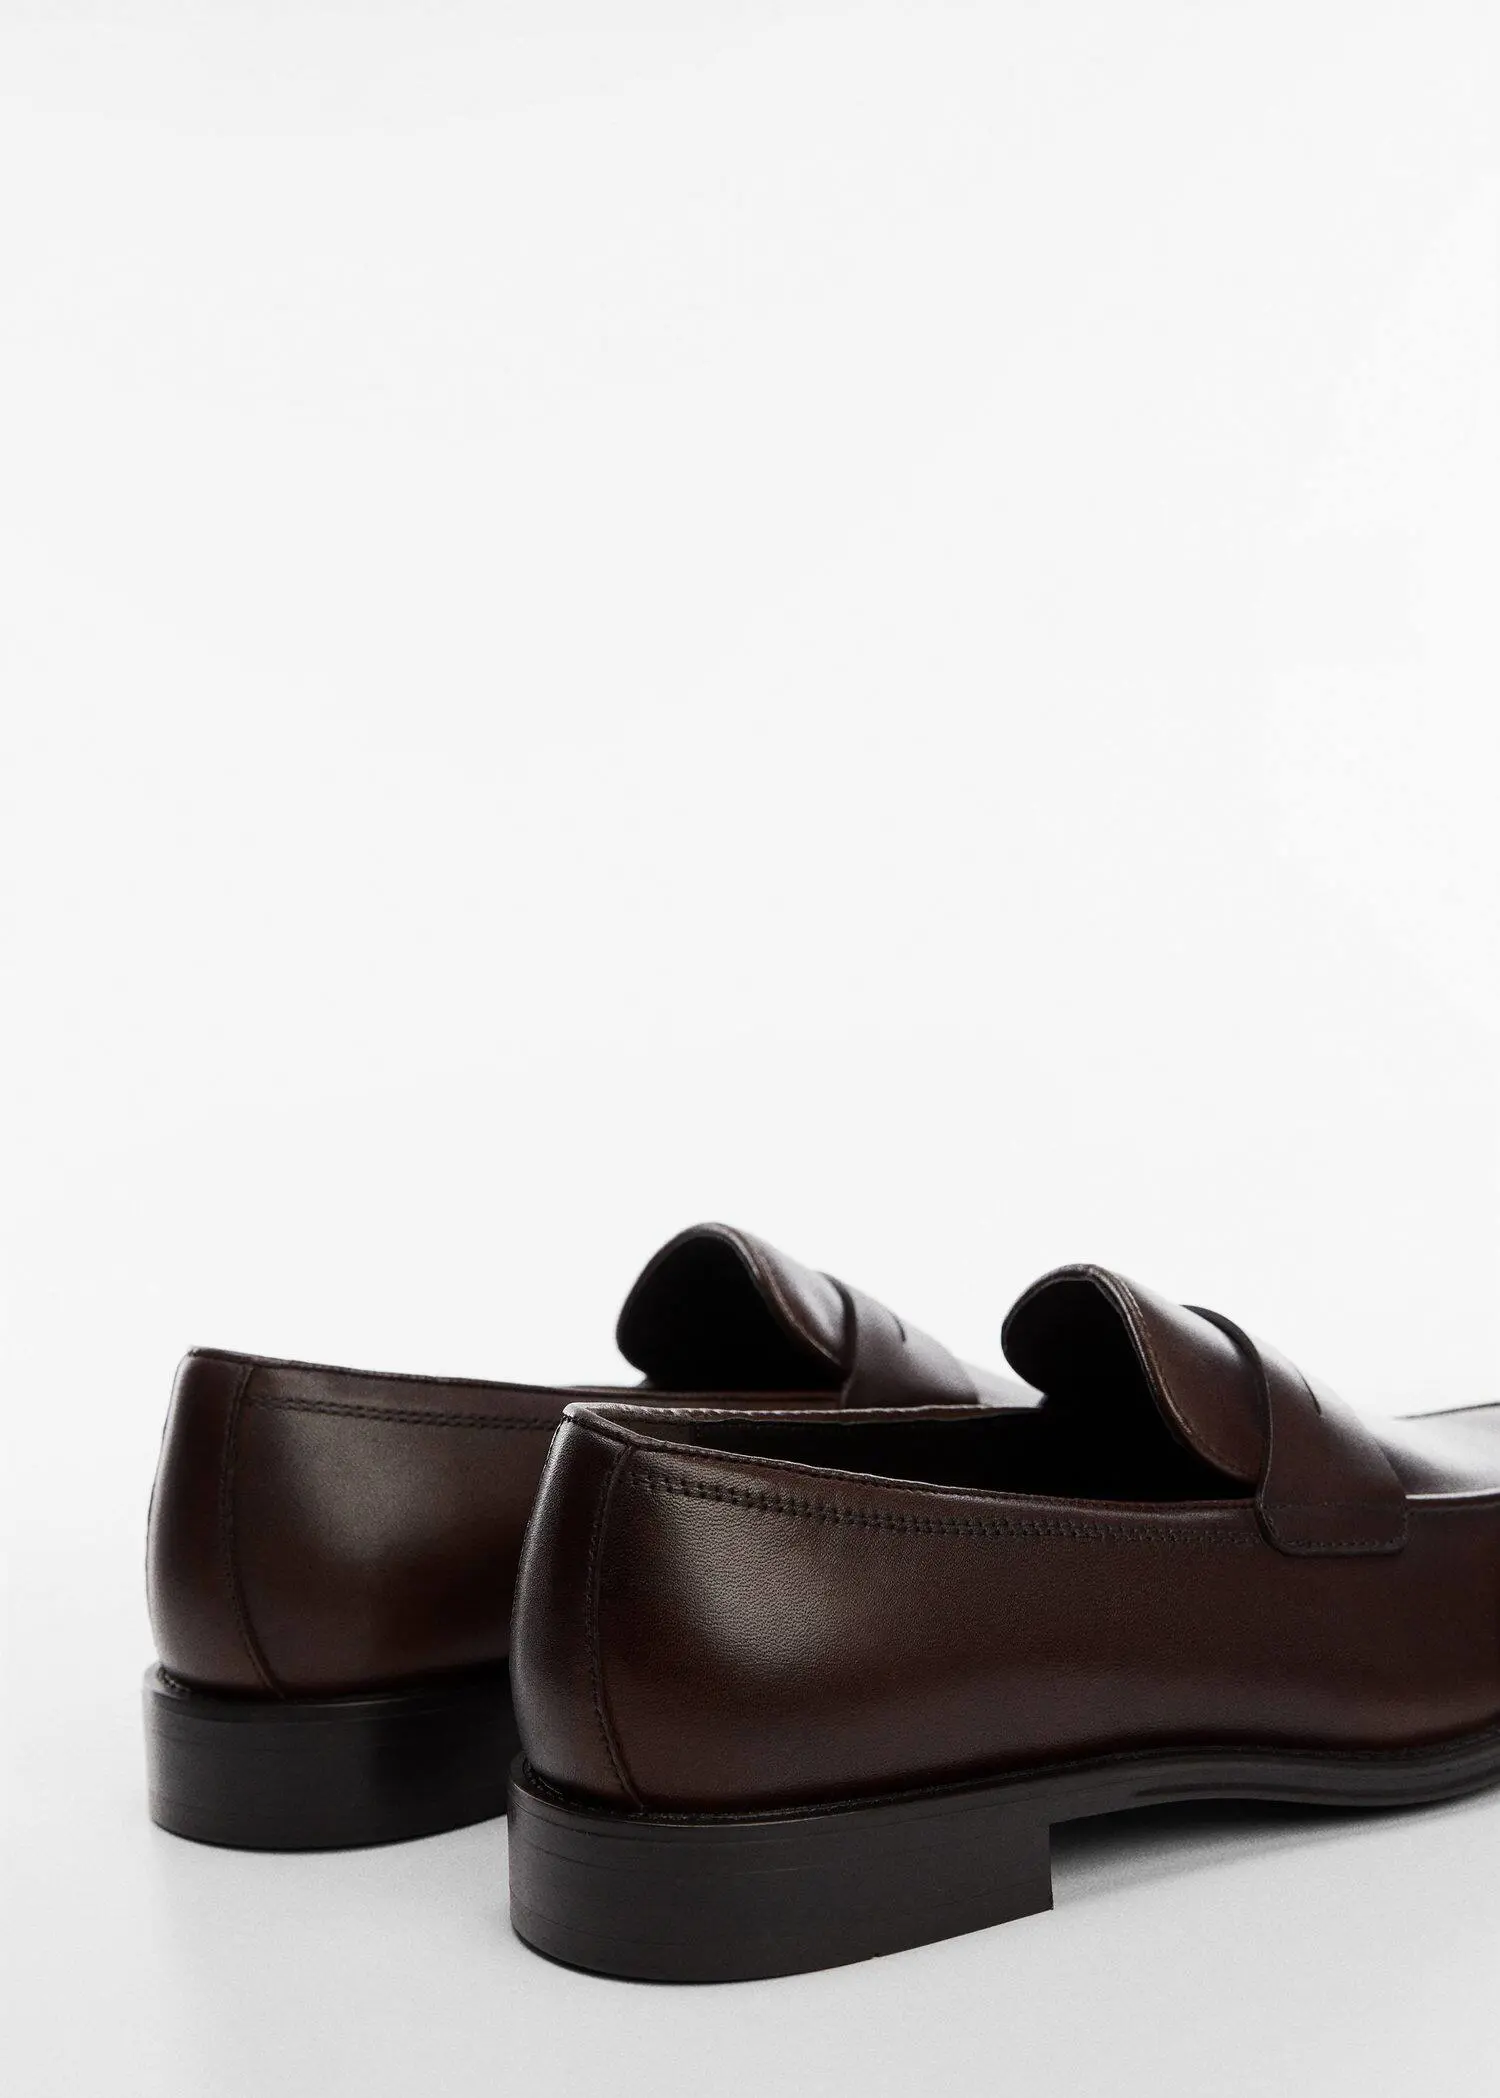 Mango Aged-leather loafers. a close up of a pair of brown shoes. 